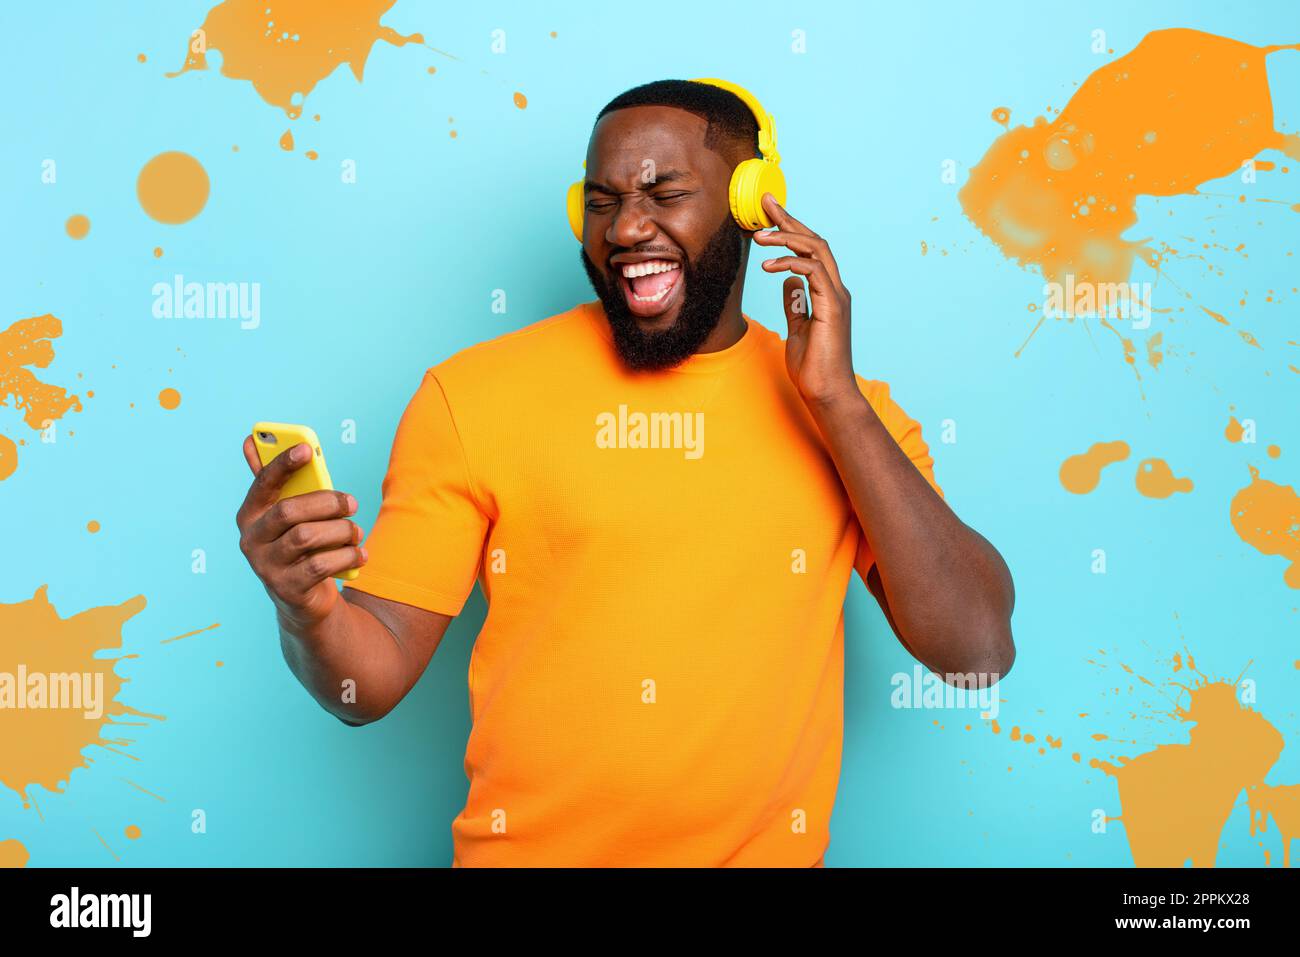 Boy with yellow headset listens to music and dances. emotional and energetic expression Stock Photo